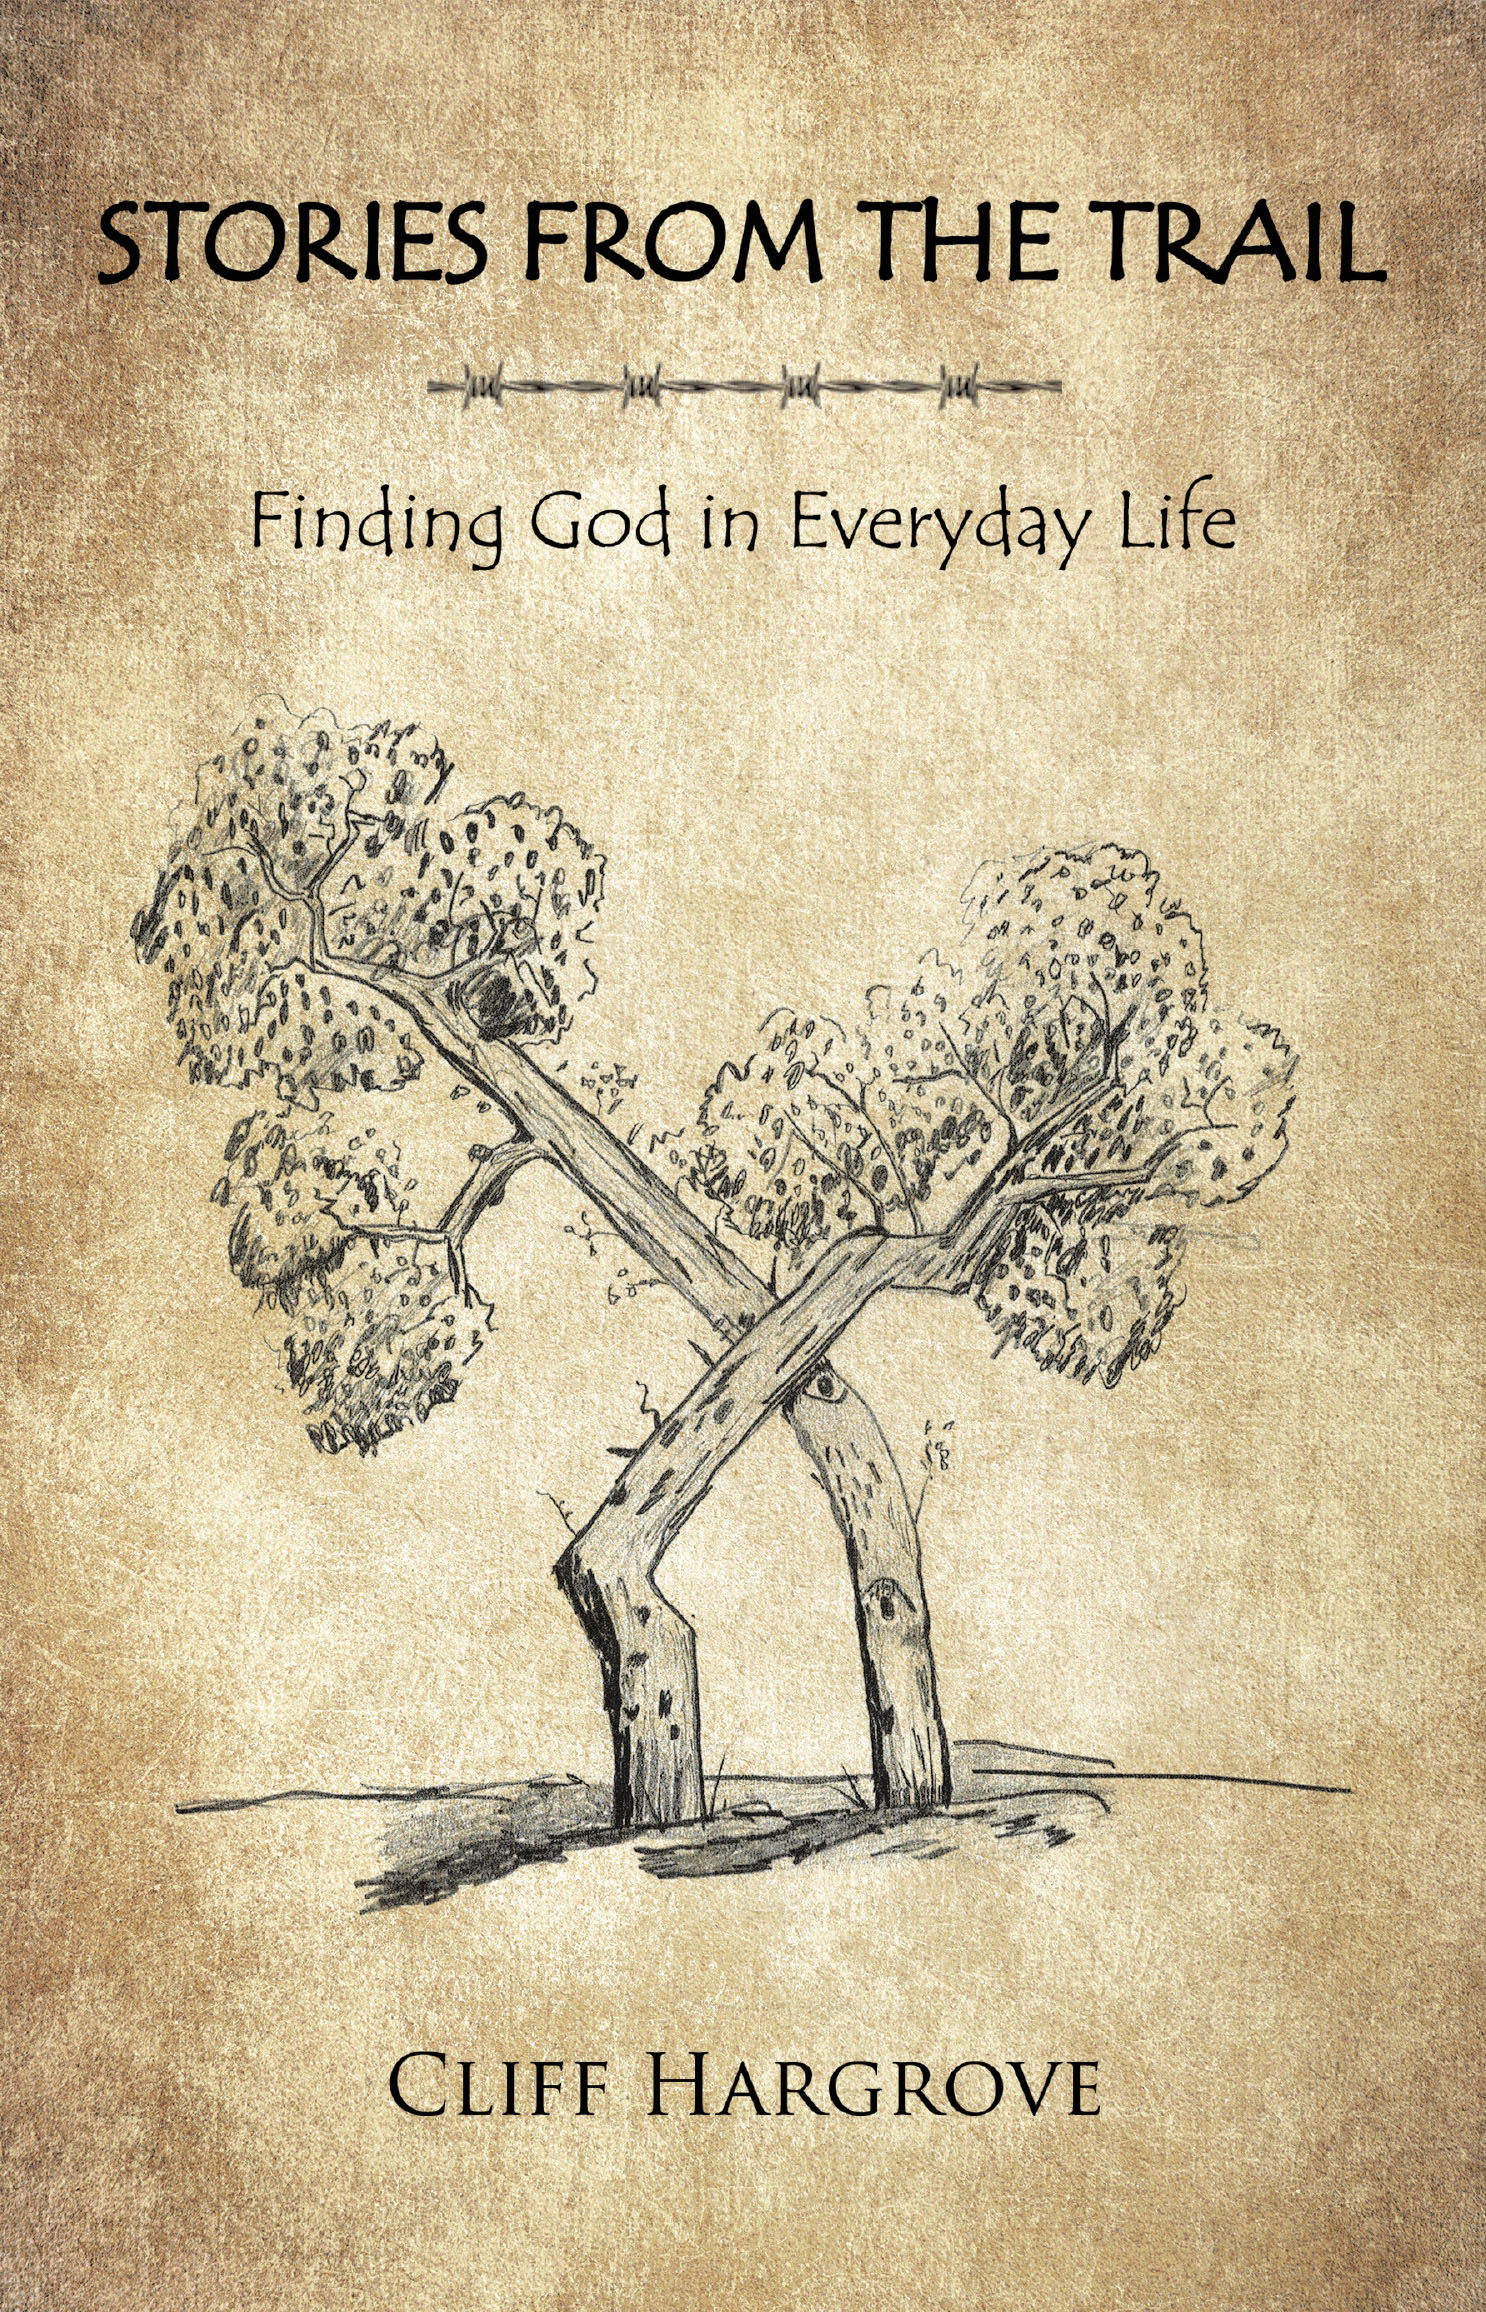 Cliff Hargrove’s New Book, "Stories from the Trail: Finding God in Everyday Life," is a Collection of Stories to Help Recontextualize Scripture in a New and Exciting Way